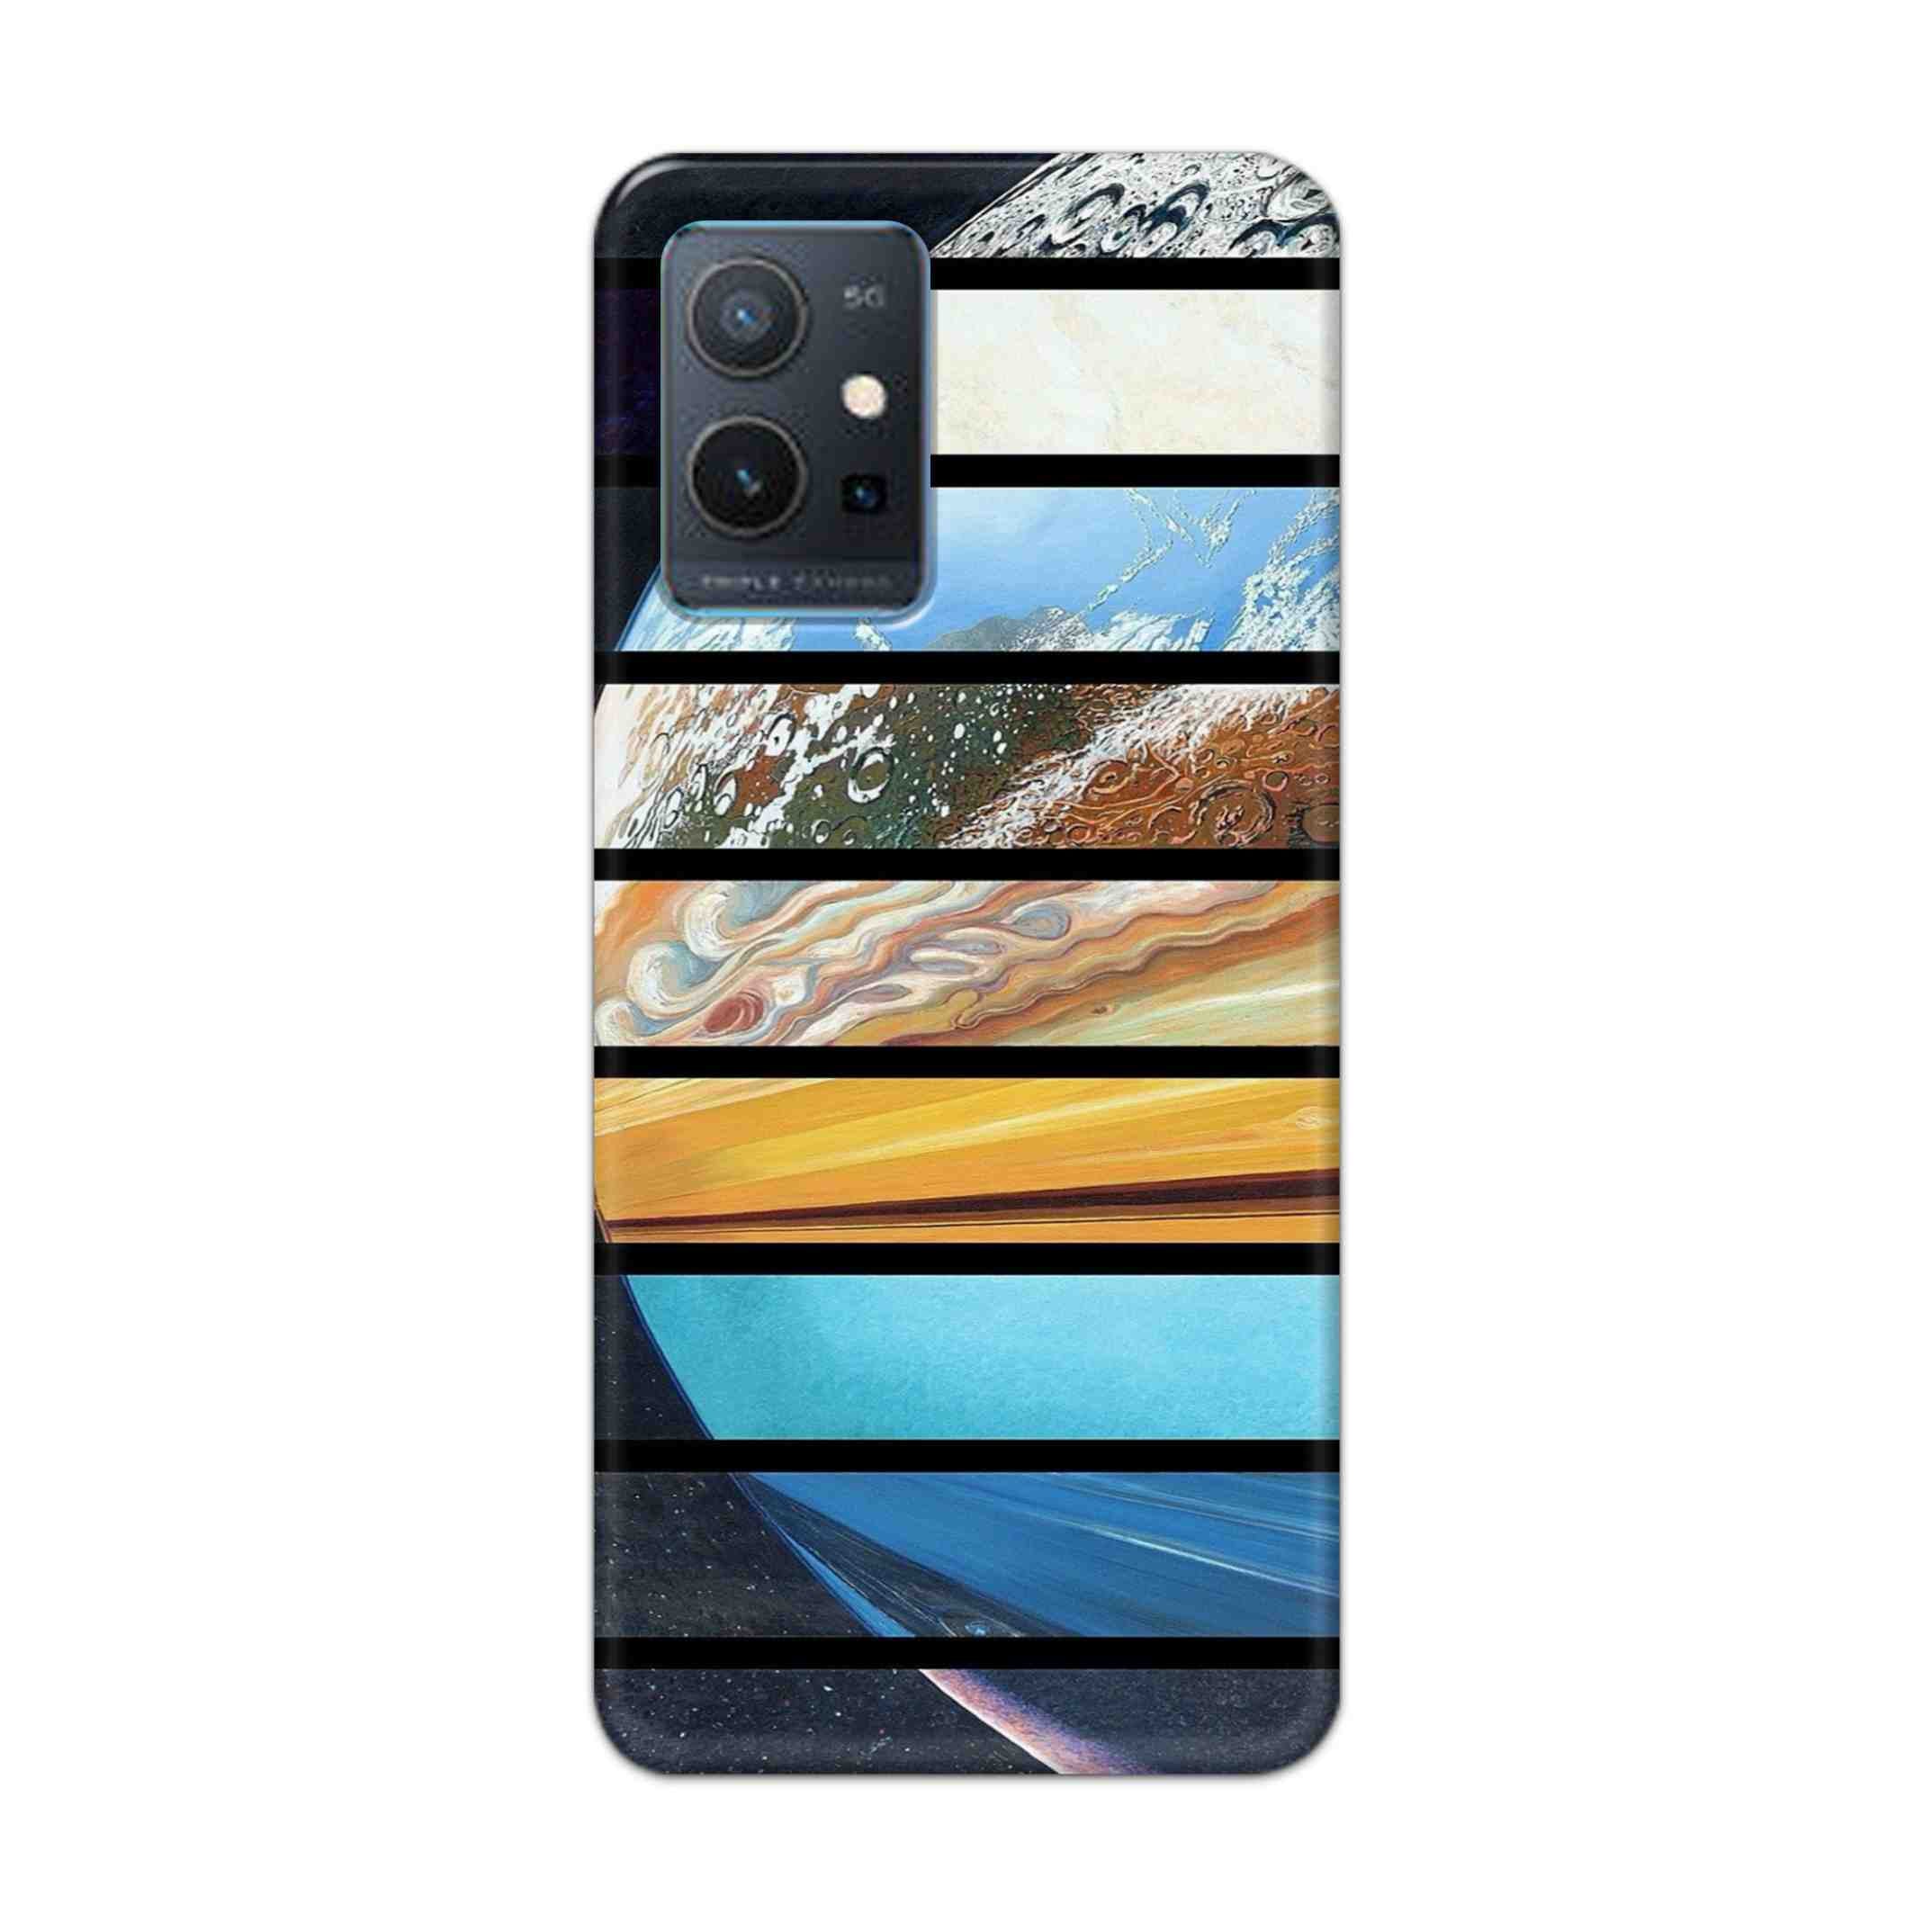 Buy Colourful Earth Hard Back Mobile Phone Case Cover For Vivo Y75 5G Online